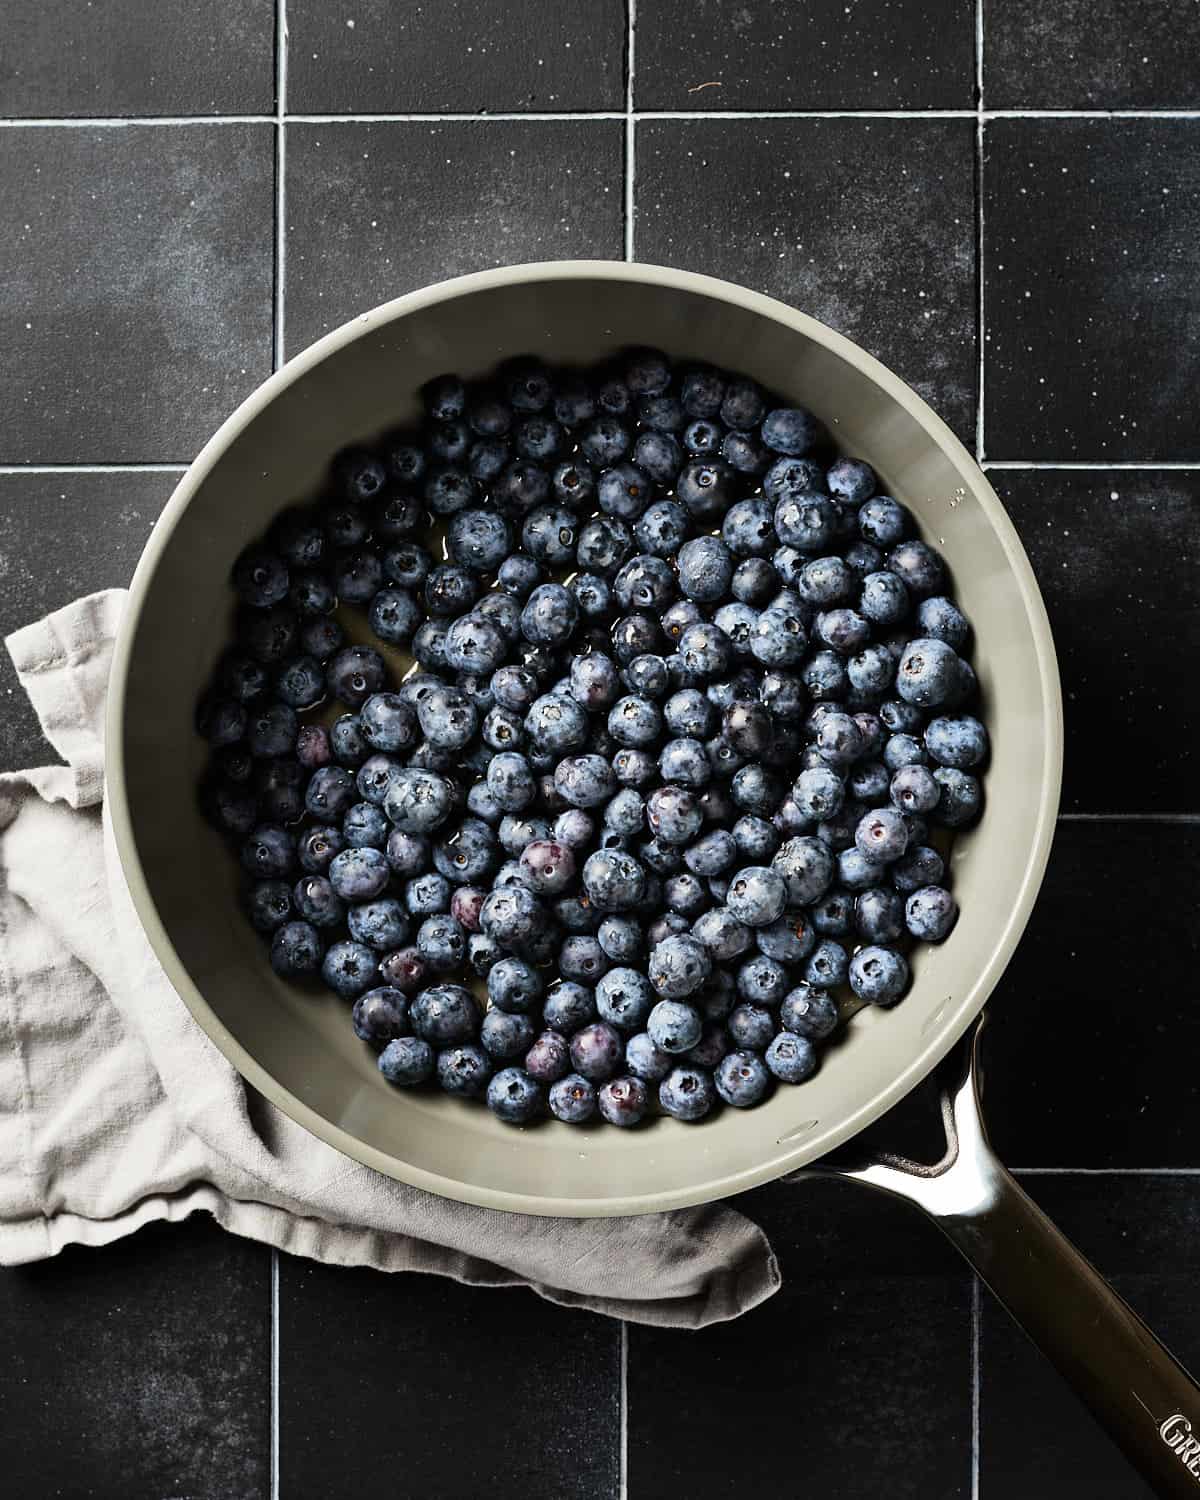 Overhead view of blueberries in saucepan with maple syrup.